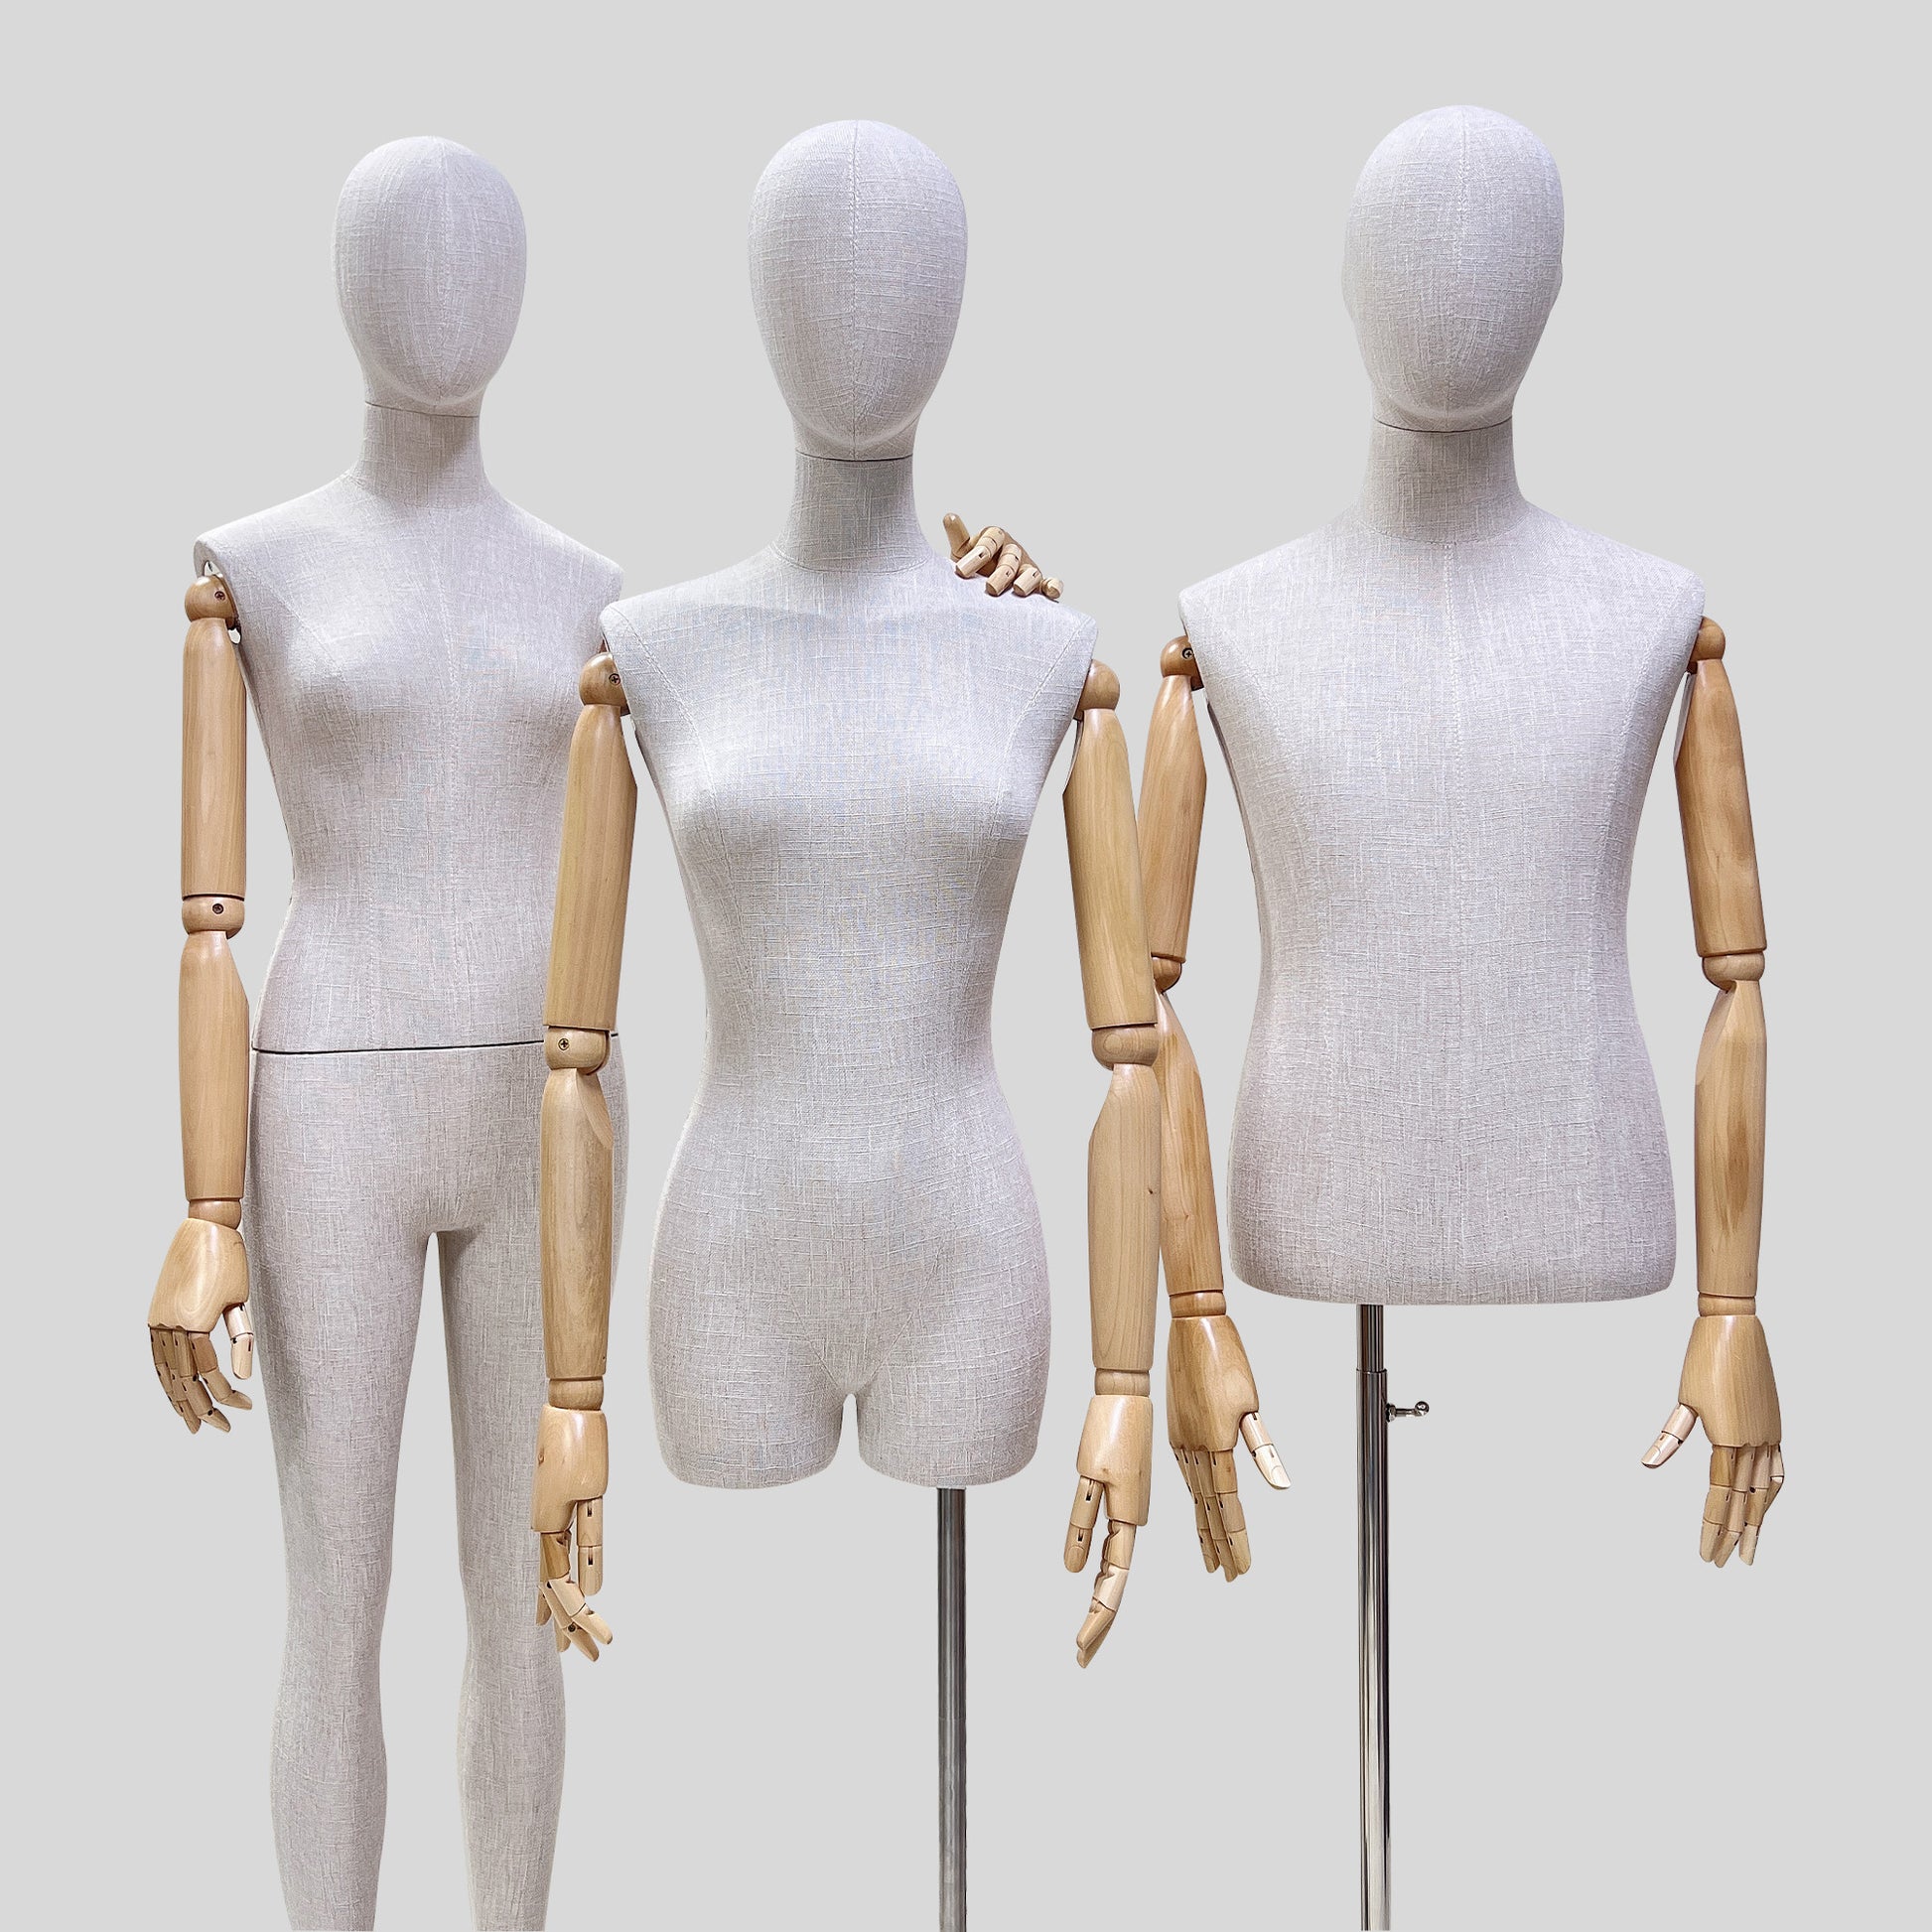 Jelimate Clothing Store Beige Kid Mannequin Torso Display,Canvas Mannequin  Fabric Dress Form,Clothing Dress Form Child Model Wooden Arms Manikin Head